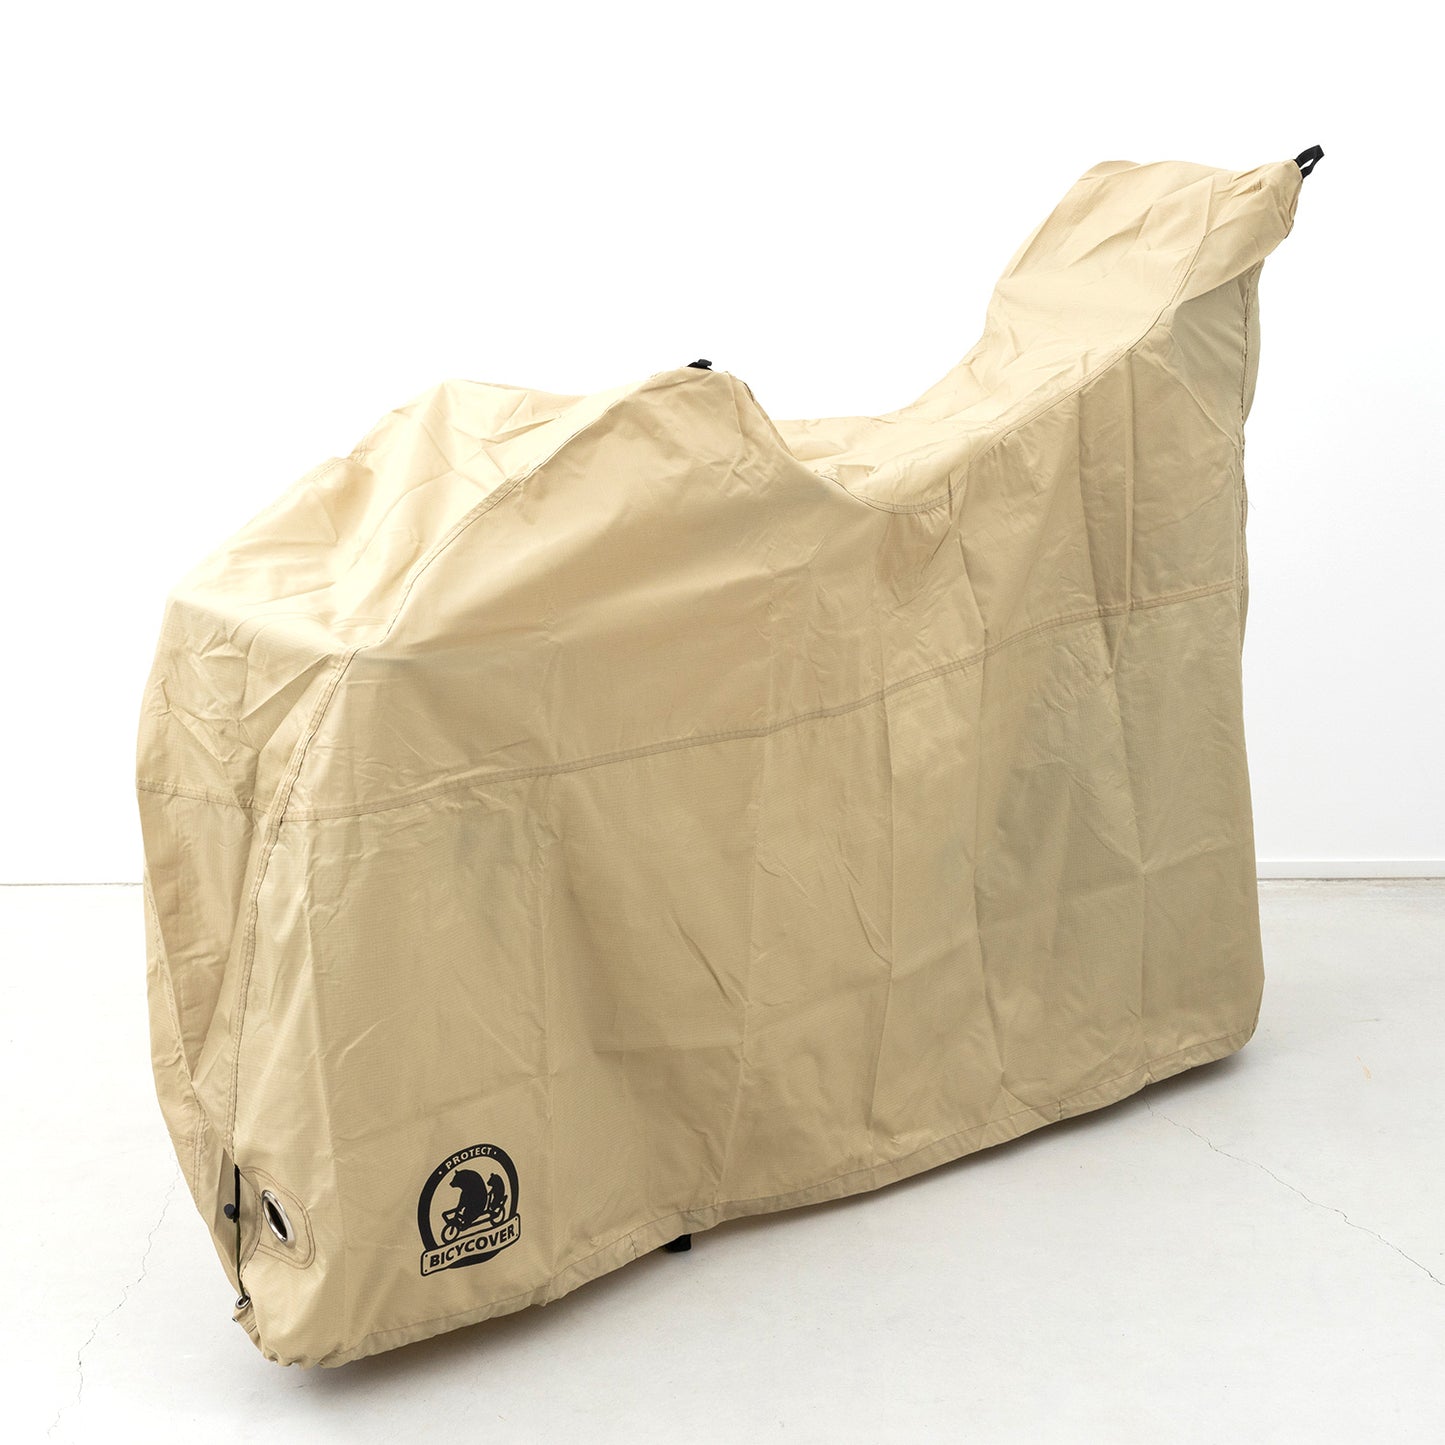 BICYCOVER high spec cycle cover regular size